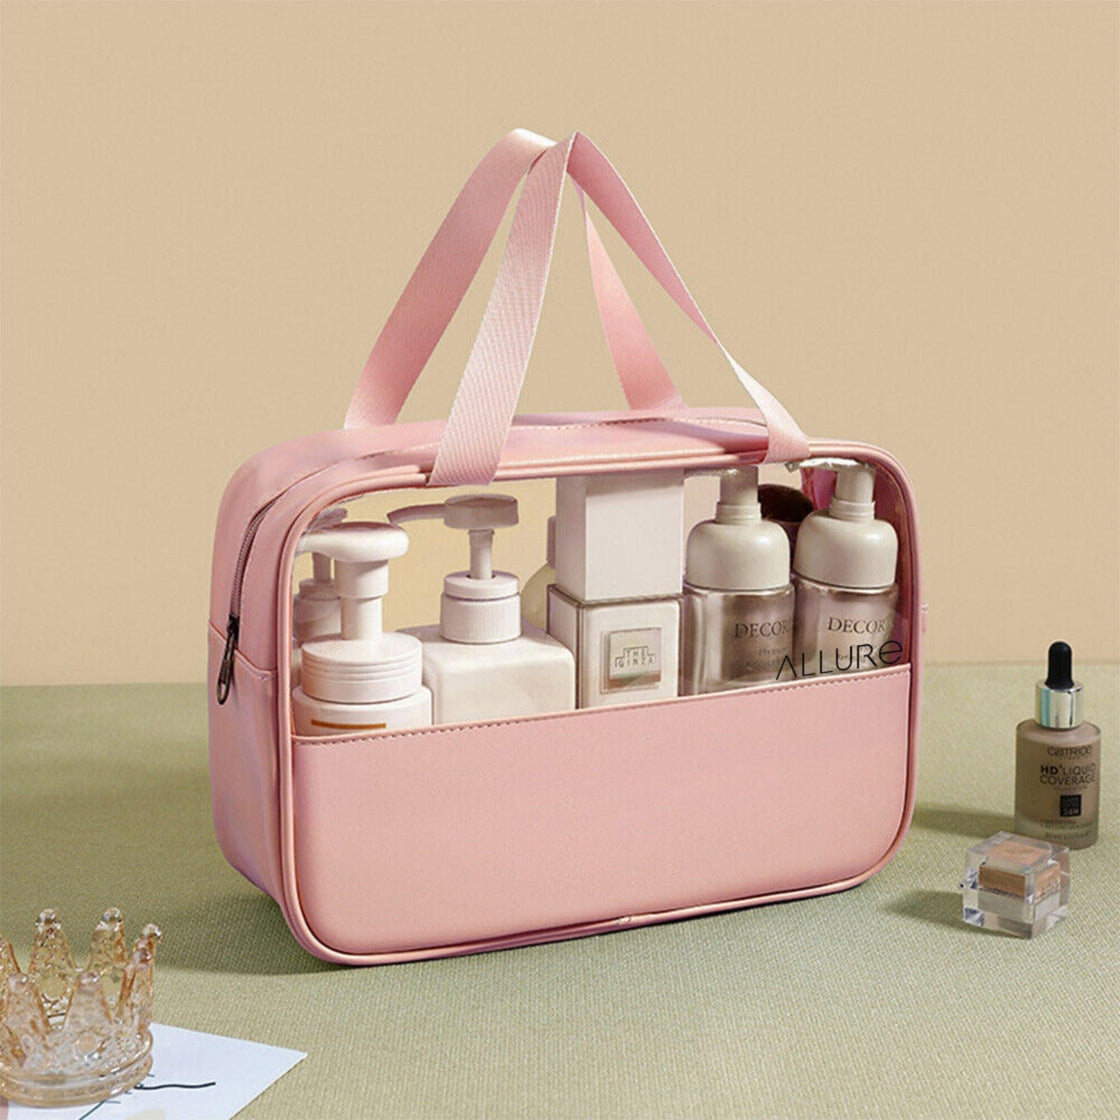 Allure Toiletry Bag large Pink